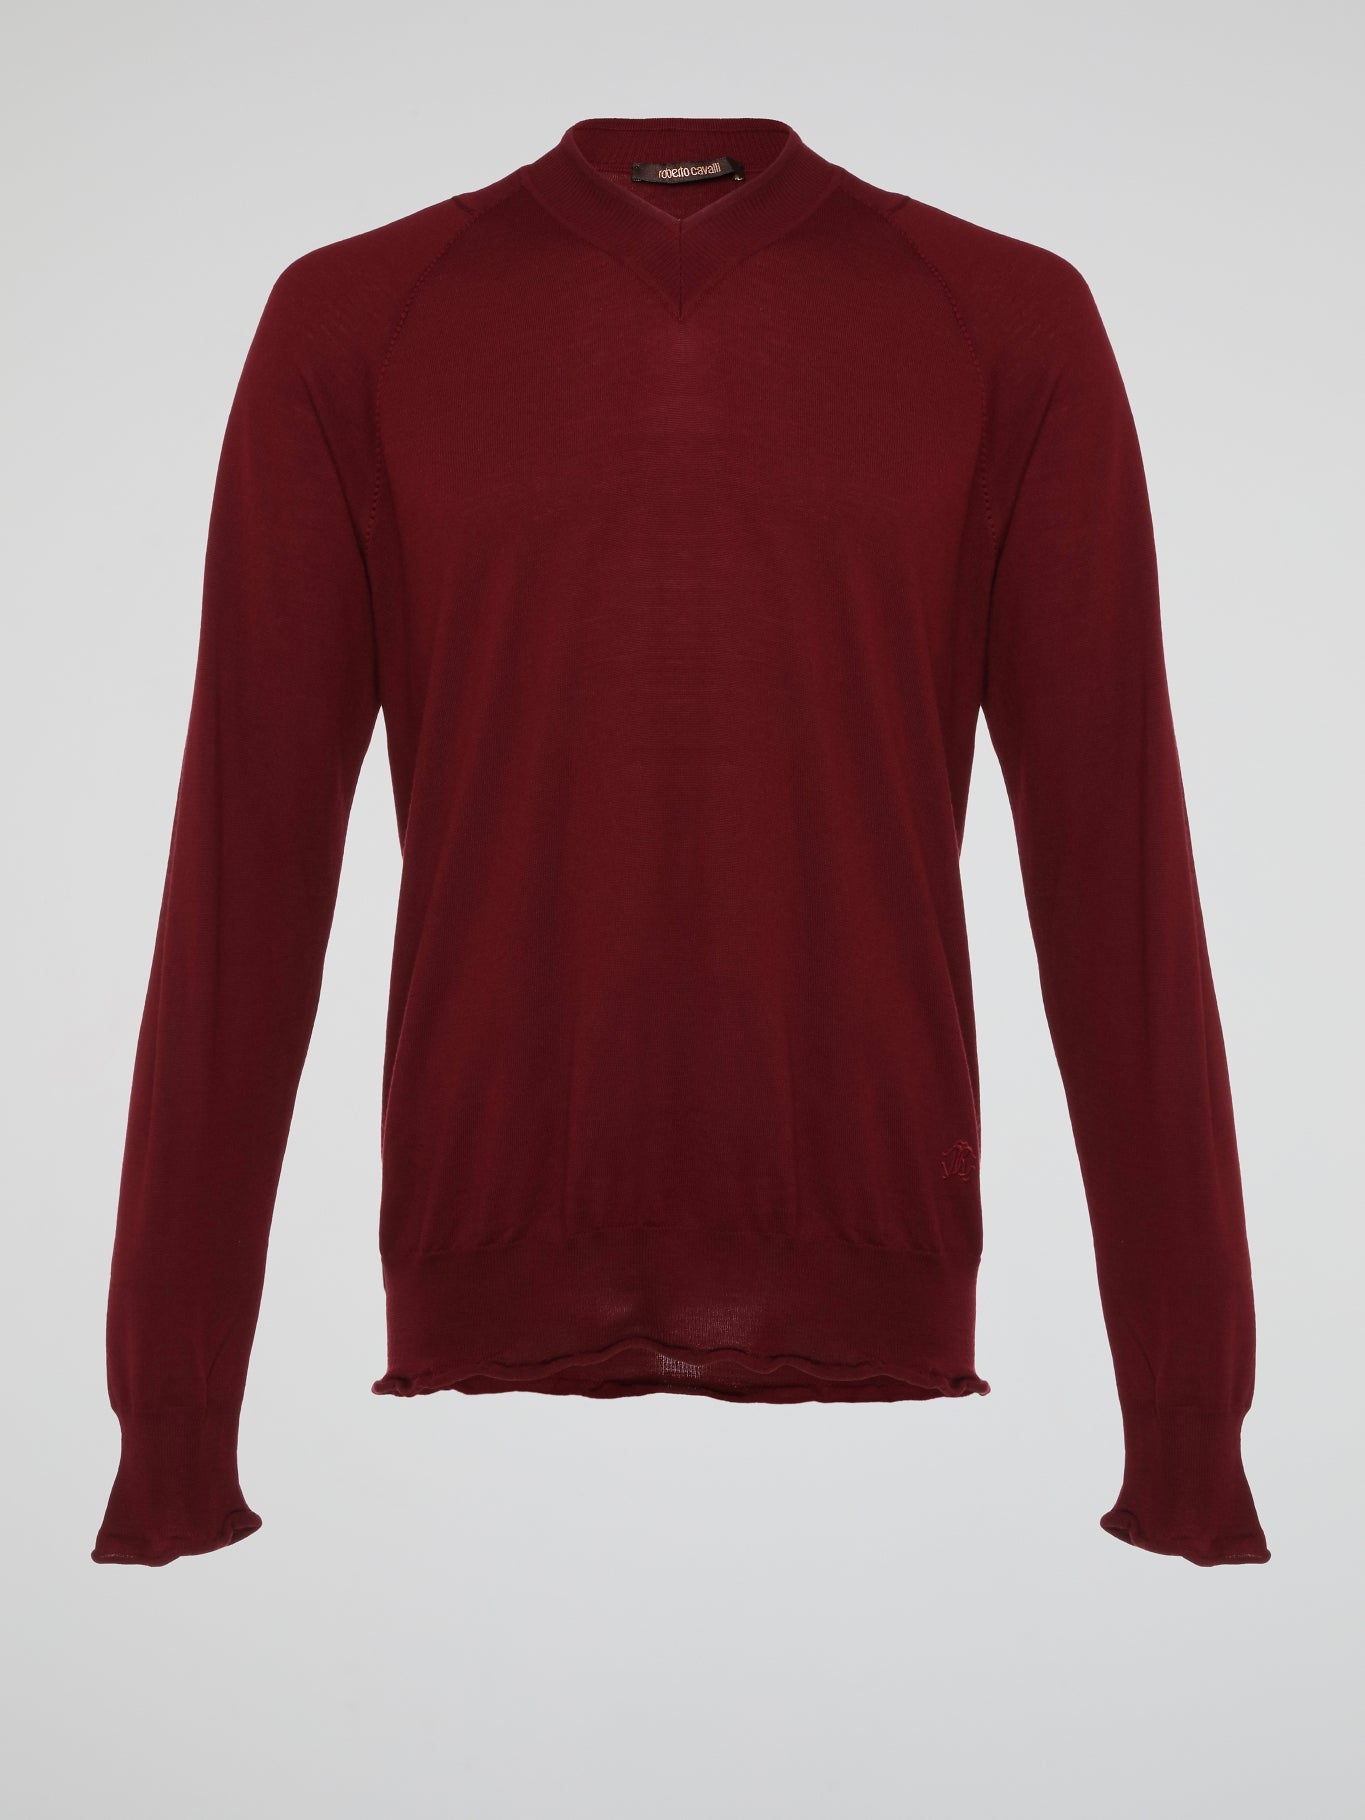 Wrap yourself in luxurious comfort with the Burgundy Knitted Sweatshirt by Roberto Cavalli. Crafted from ultra-soft materials, this enchanting garment envelops you in warmth while showcasing Cavalli's signature elegance. The stunning burgundy hue and intricate knitted pattern make this sweatshirt a standout piece, perfect for adding a dash of sophistication to your everyday wardrobe.